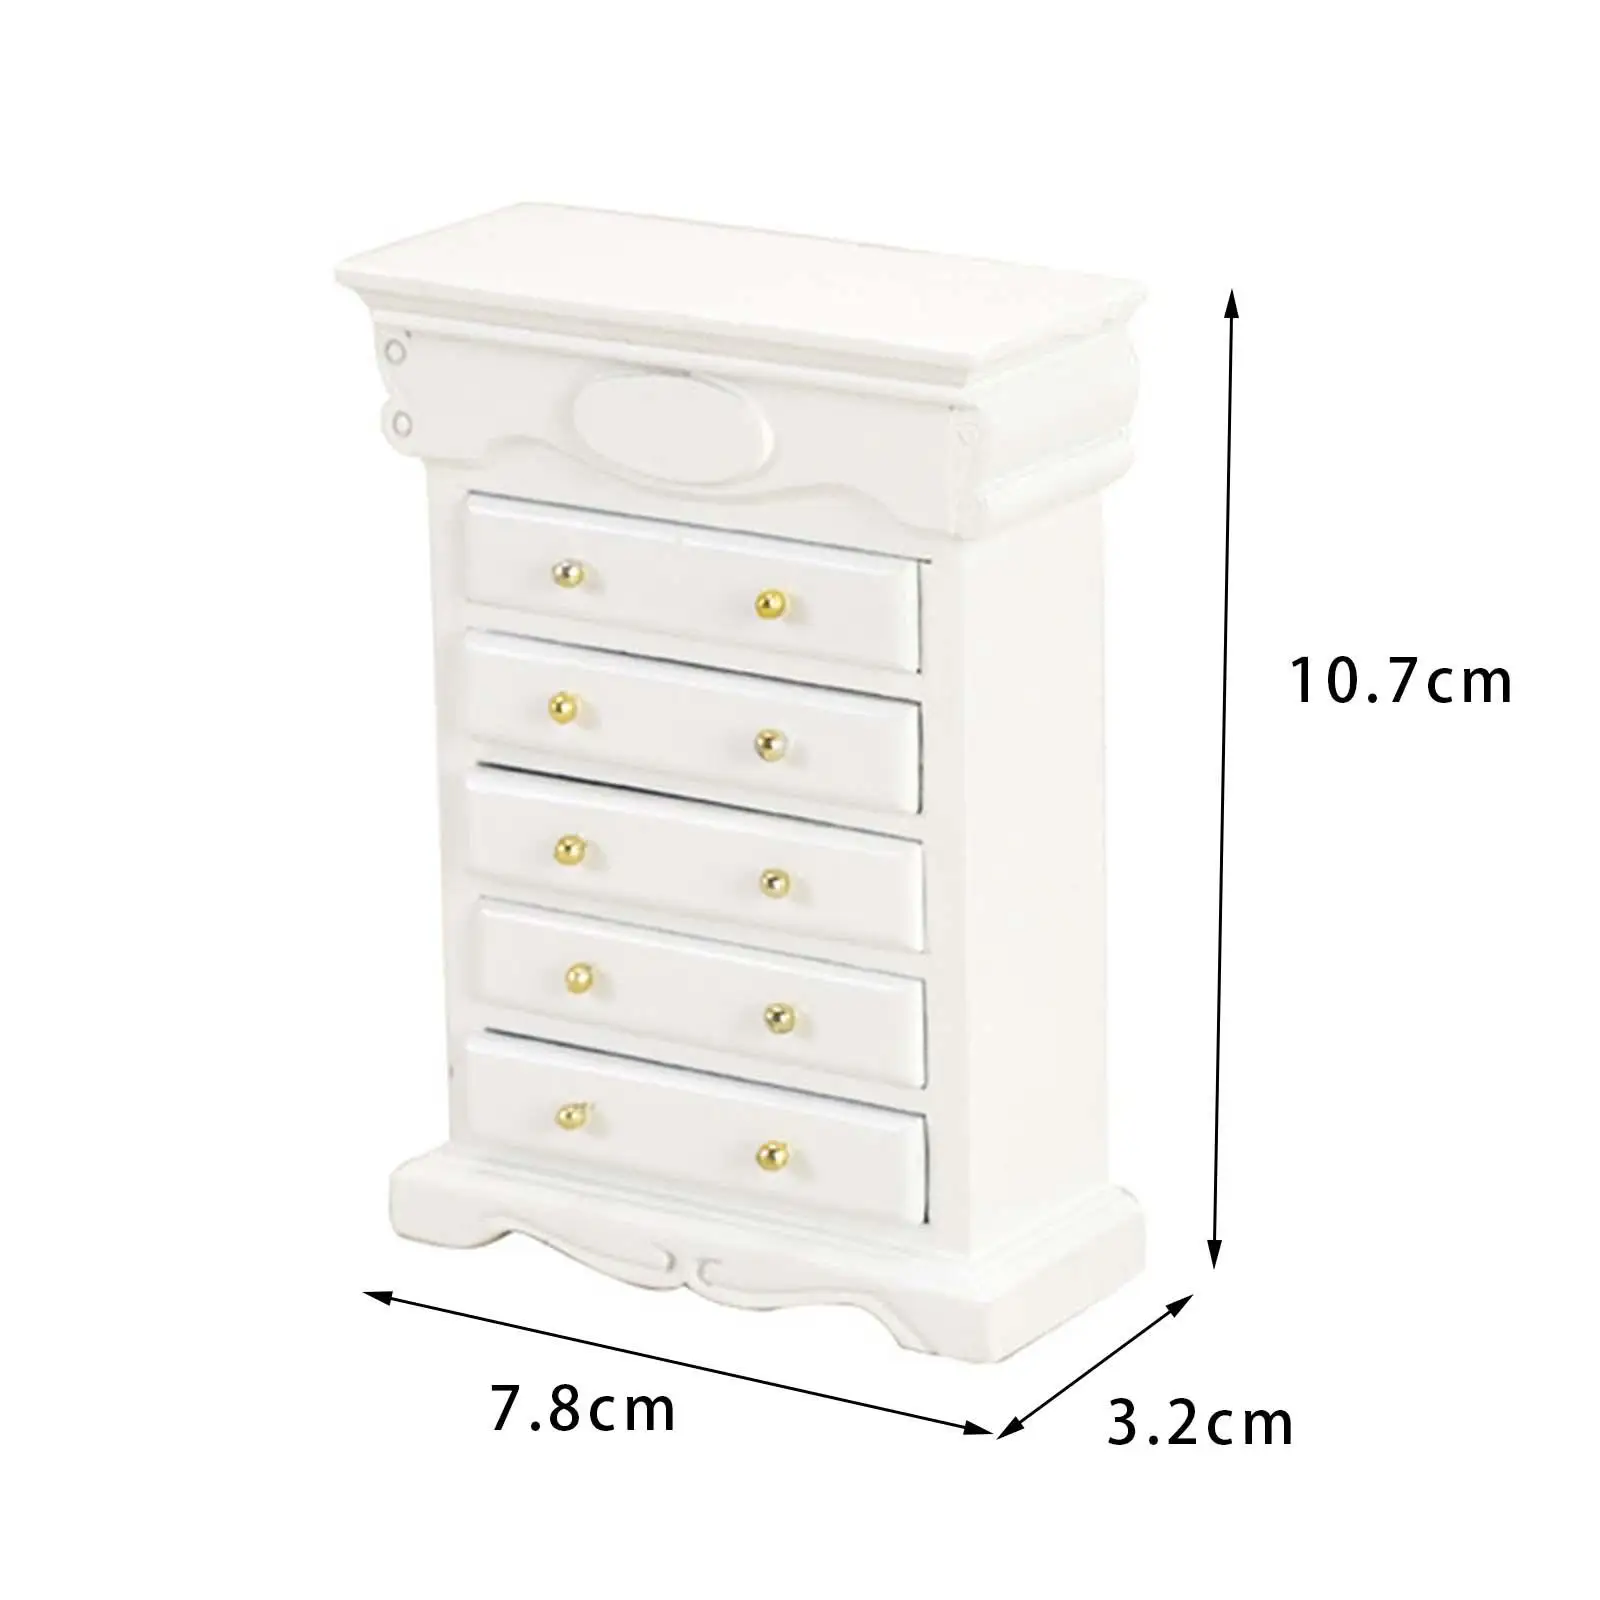 1/12 Miniature Cabinet Miniature Bedside Table DIY Scene Accessories 1:12 Dollhouse NightStand for Bedroom Living Room Decor